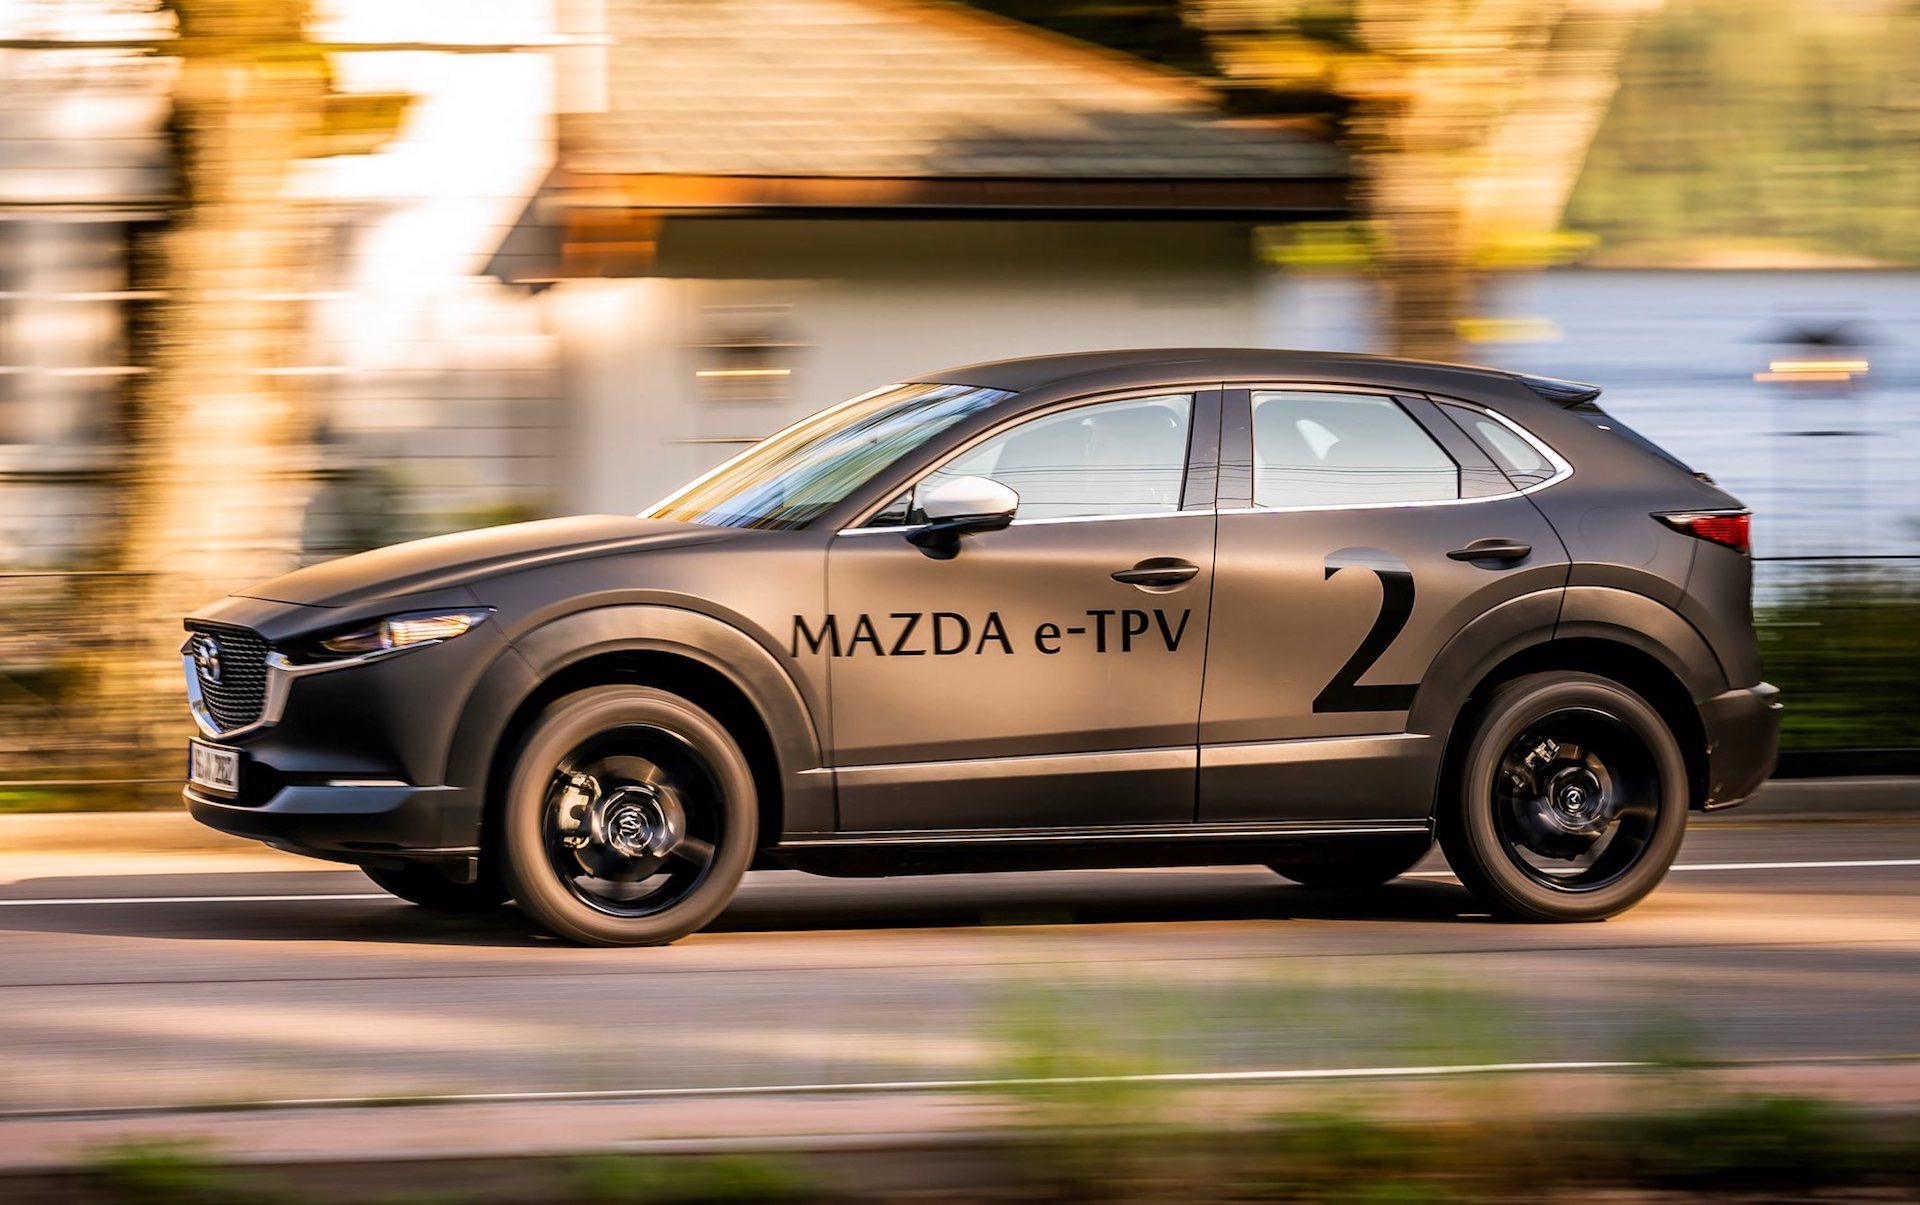 Mazda to debut all-new electric model at Tokyo show